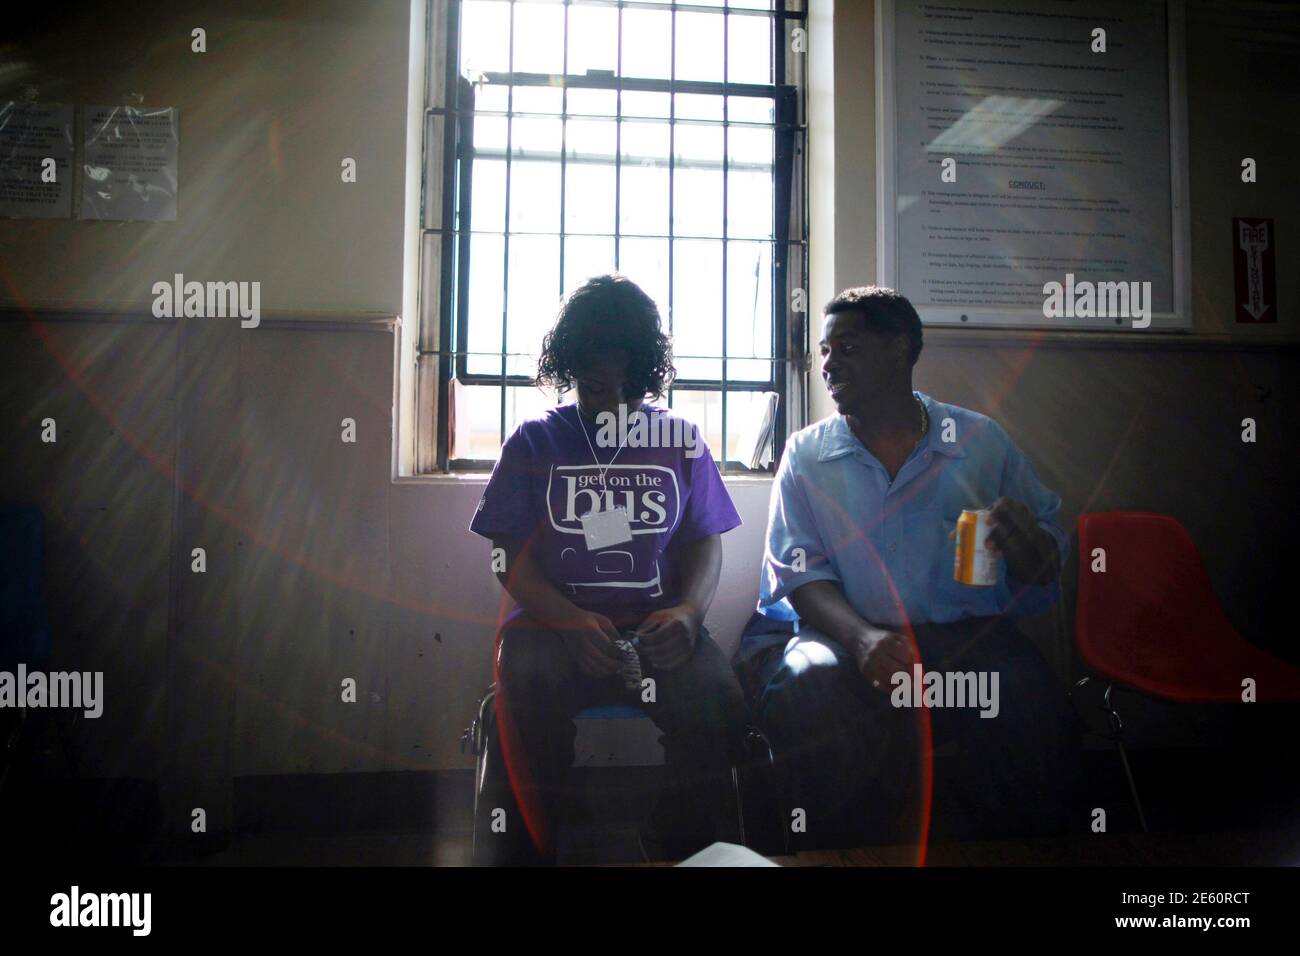 Dejane (L), 14, sits with her father Jonathan at San Quentin state prison  in San Quentin, California June 8, 2012. An annual Fathers' Day event, "Get  On The Bus" brings children in